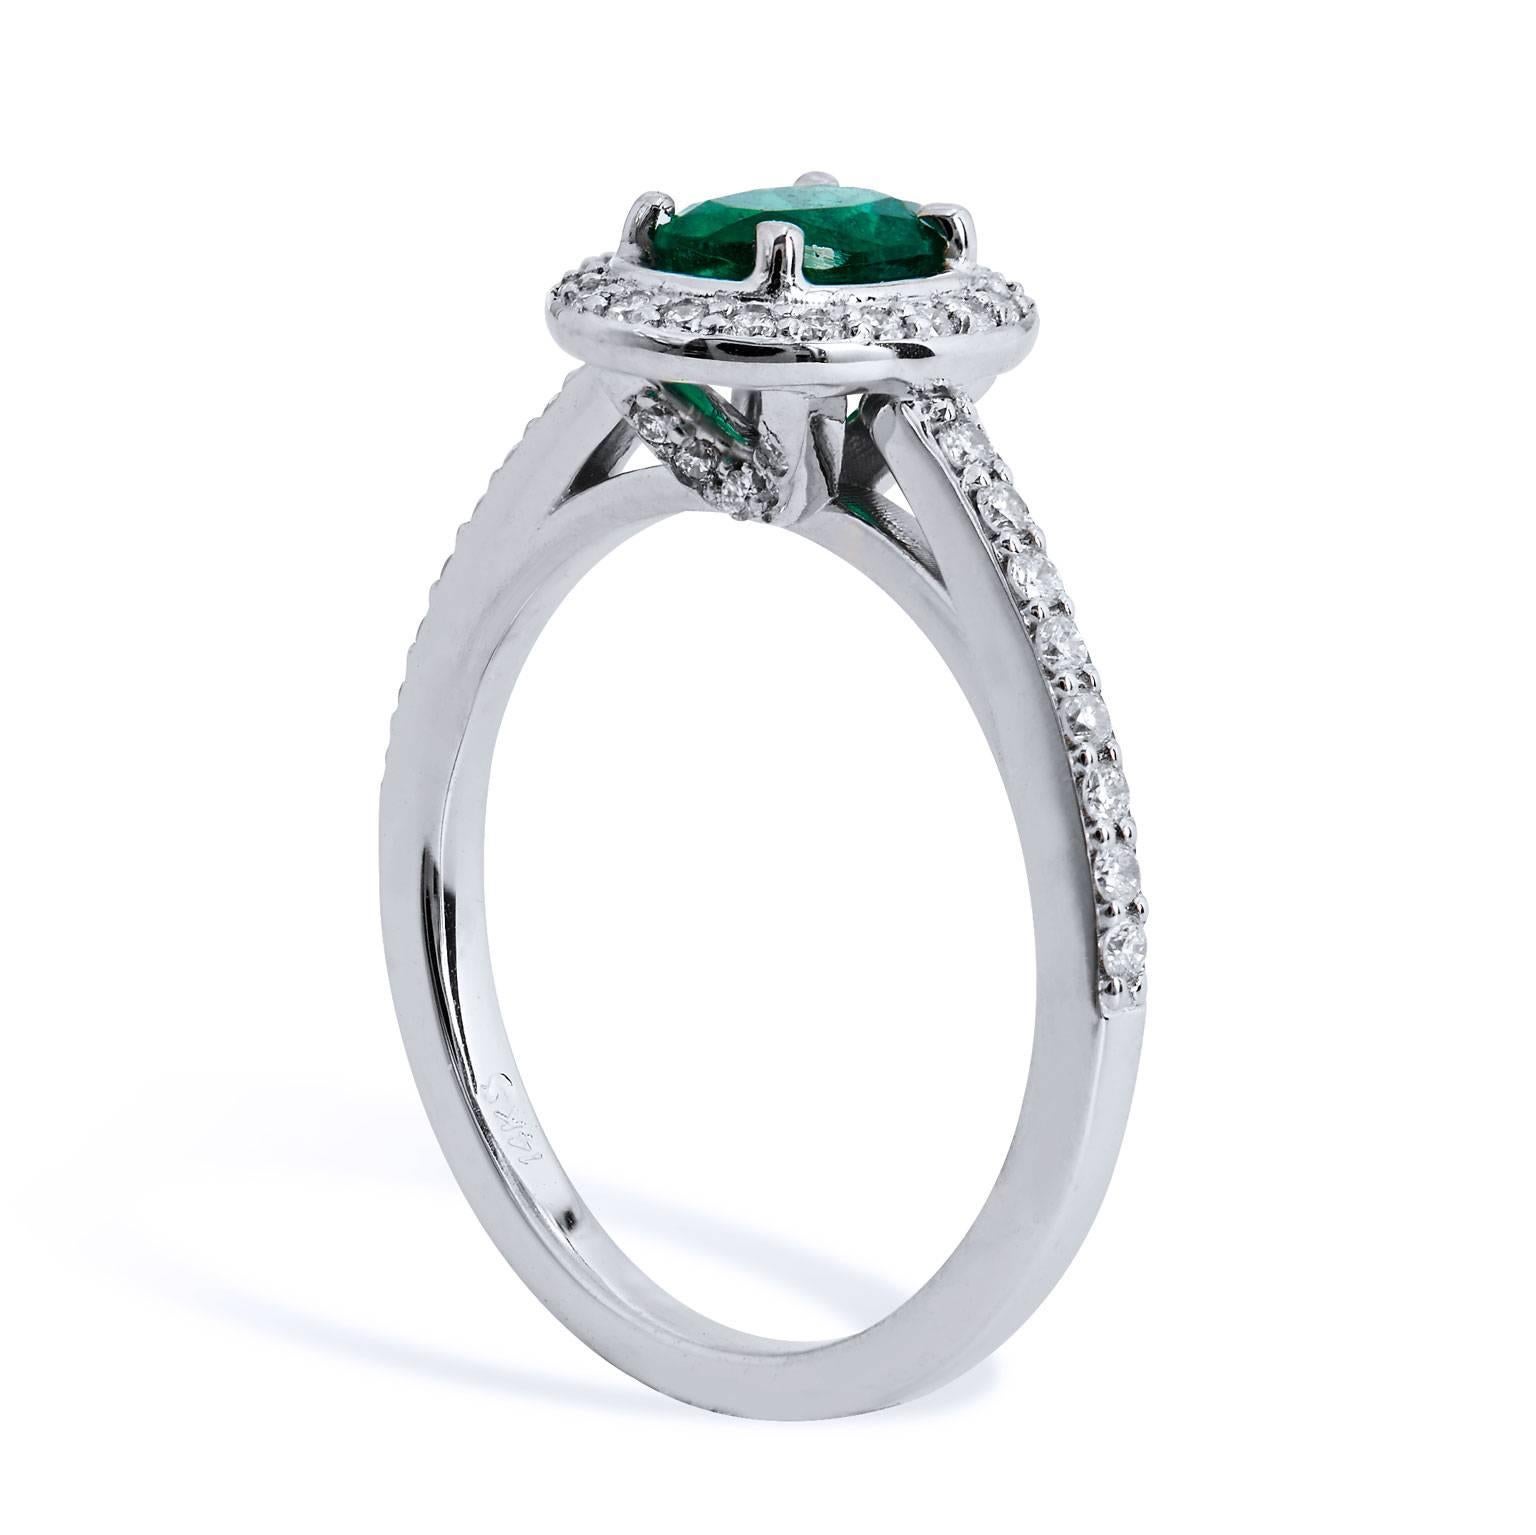 14 karat white gold forms the base for this luscious handmade H & H emerald and diamond ring. Taking center stage is a 0.64 carat oval cut Zambian Emerald displaying a vivid green hue. Clutching the center gemstone and trailing down the shank